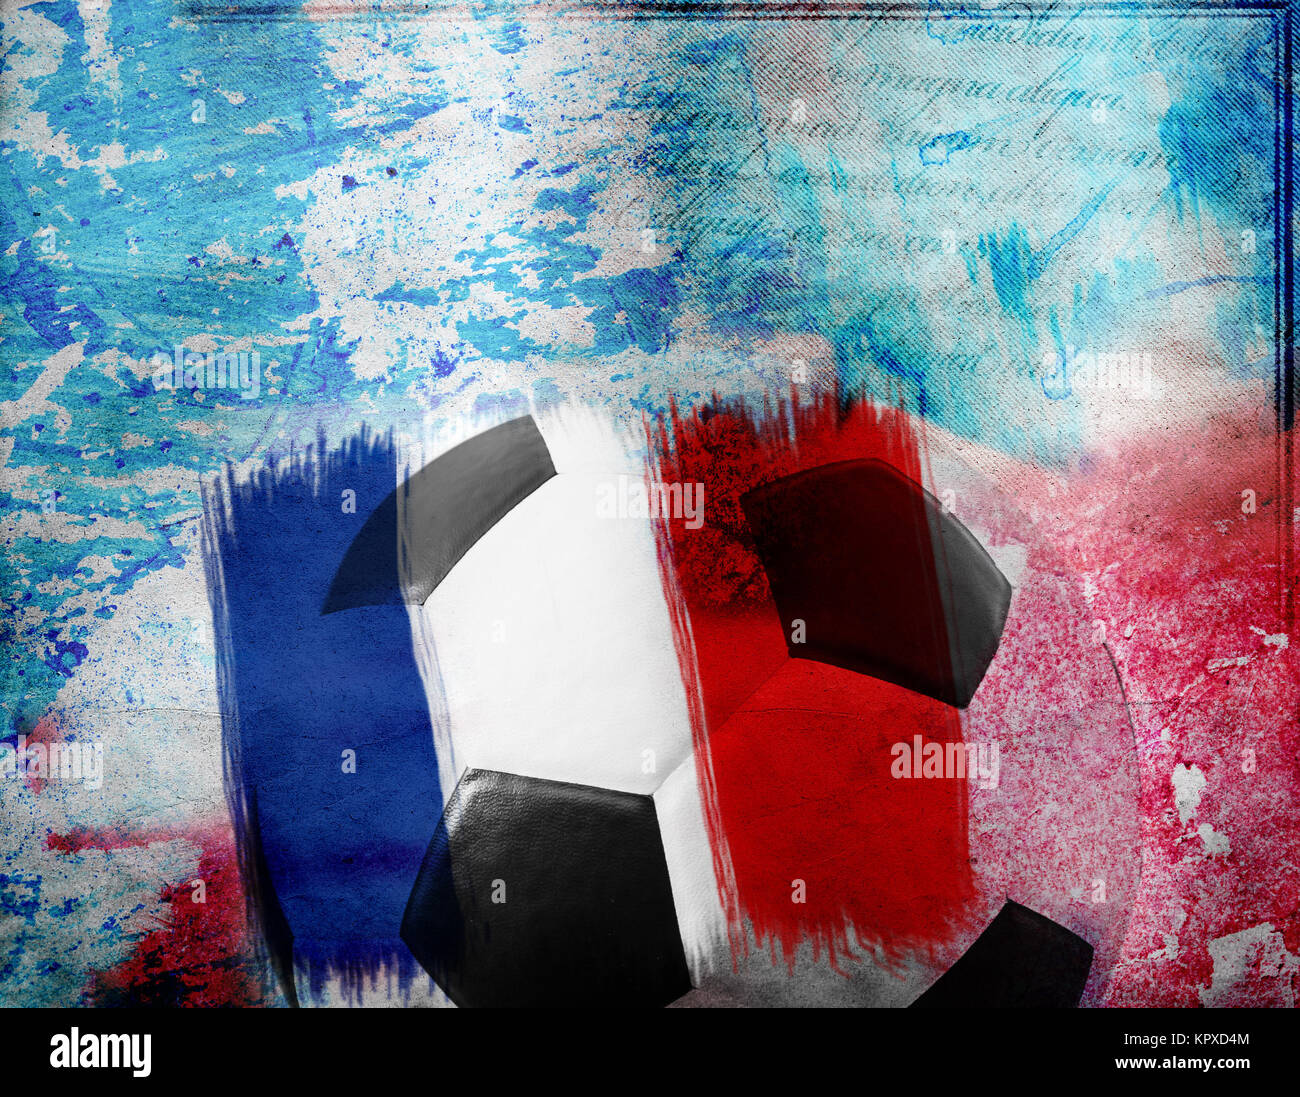 Football on France's flag colored background Stock Photo